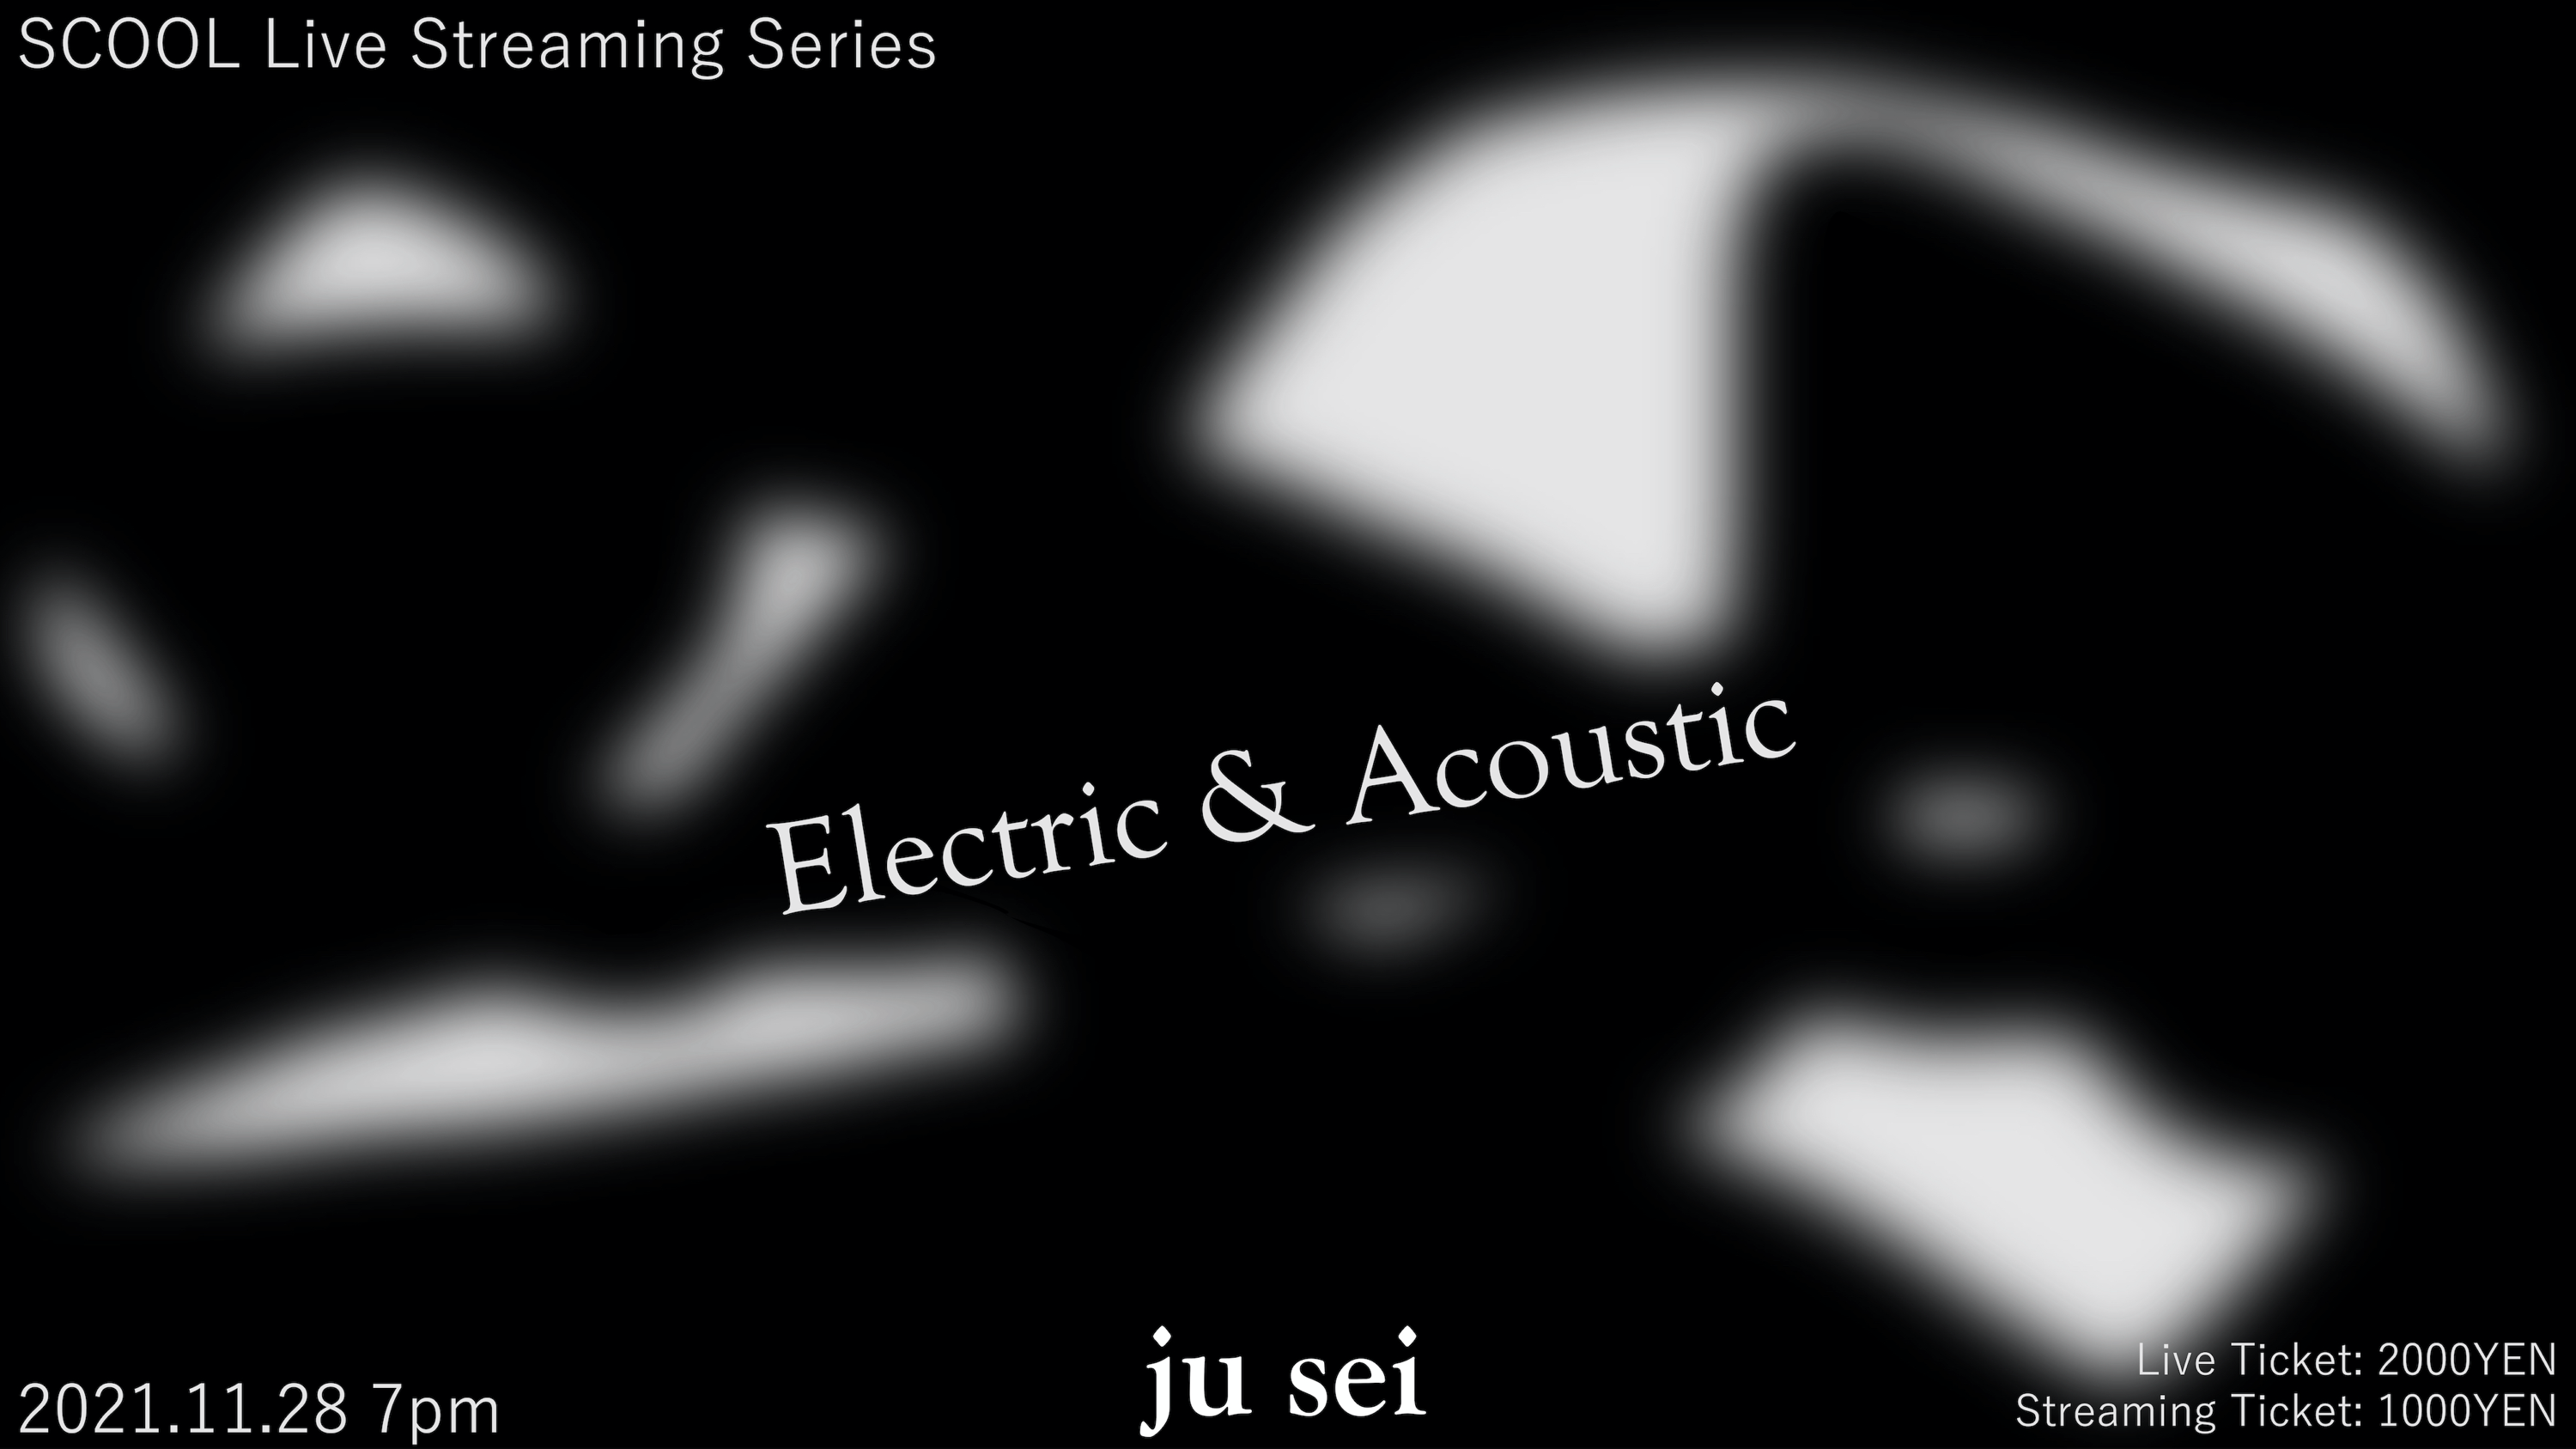 SCOOL Live Streaming Series <br>ju sei『Electric & Acoustic』